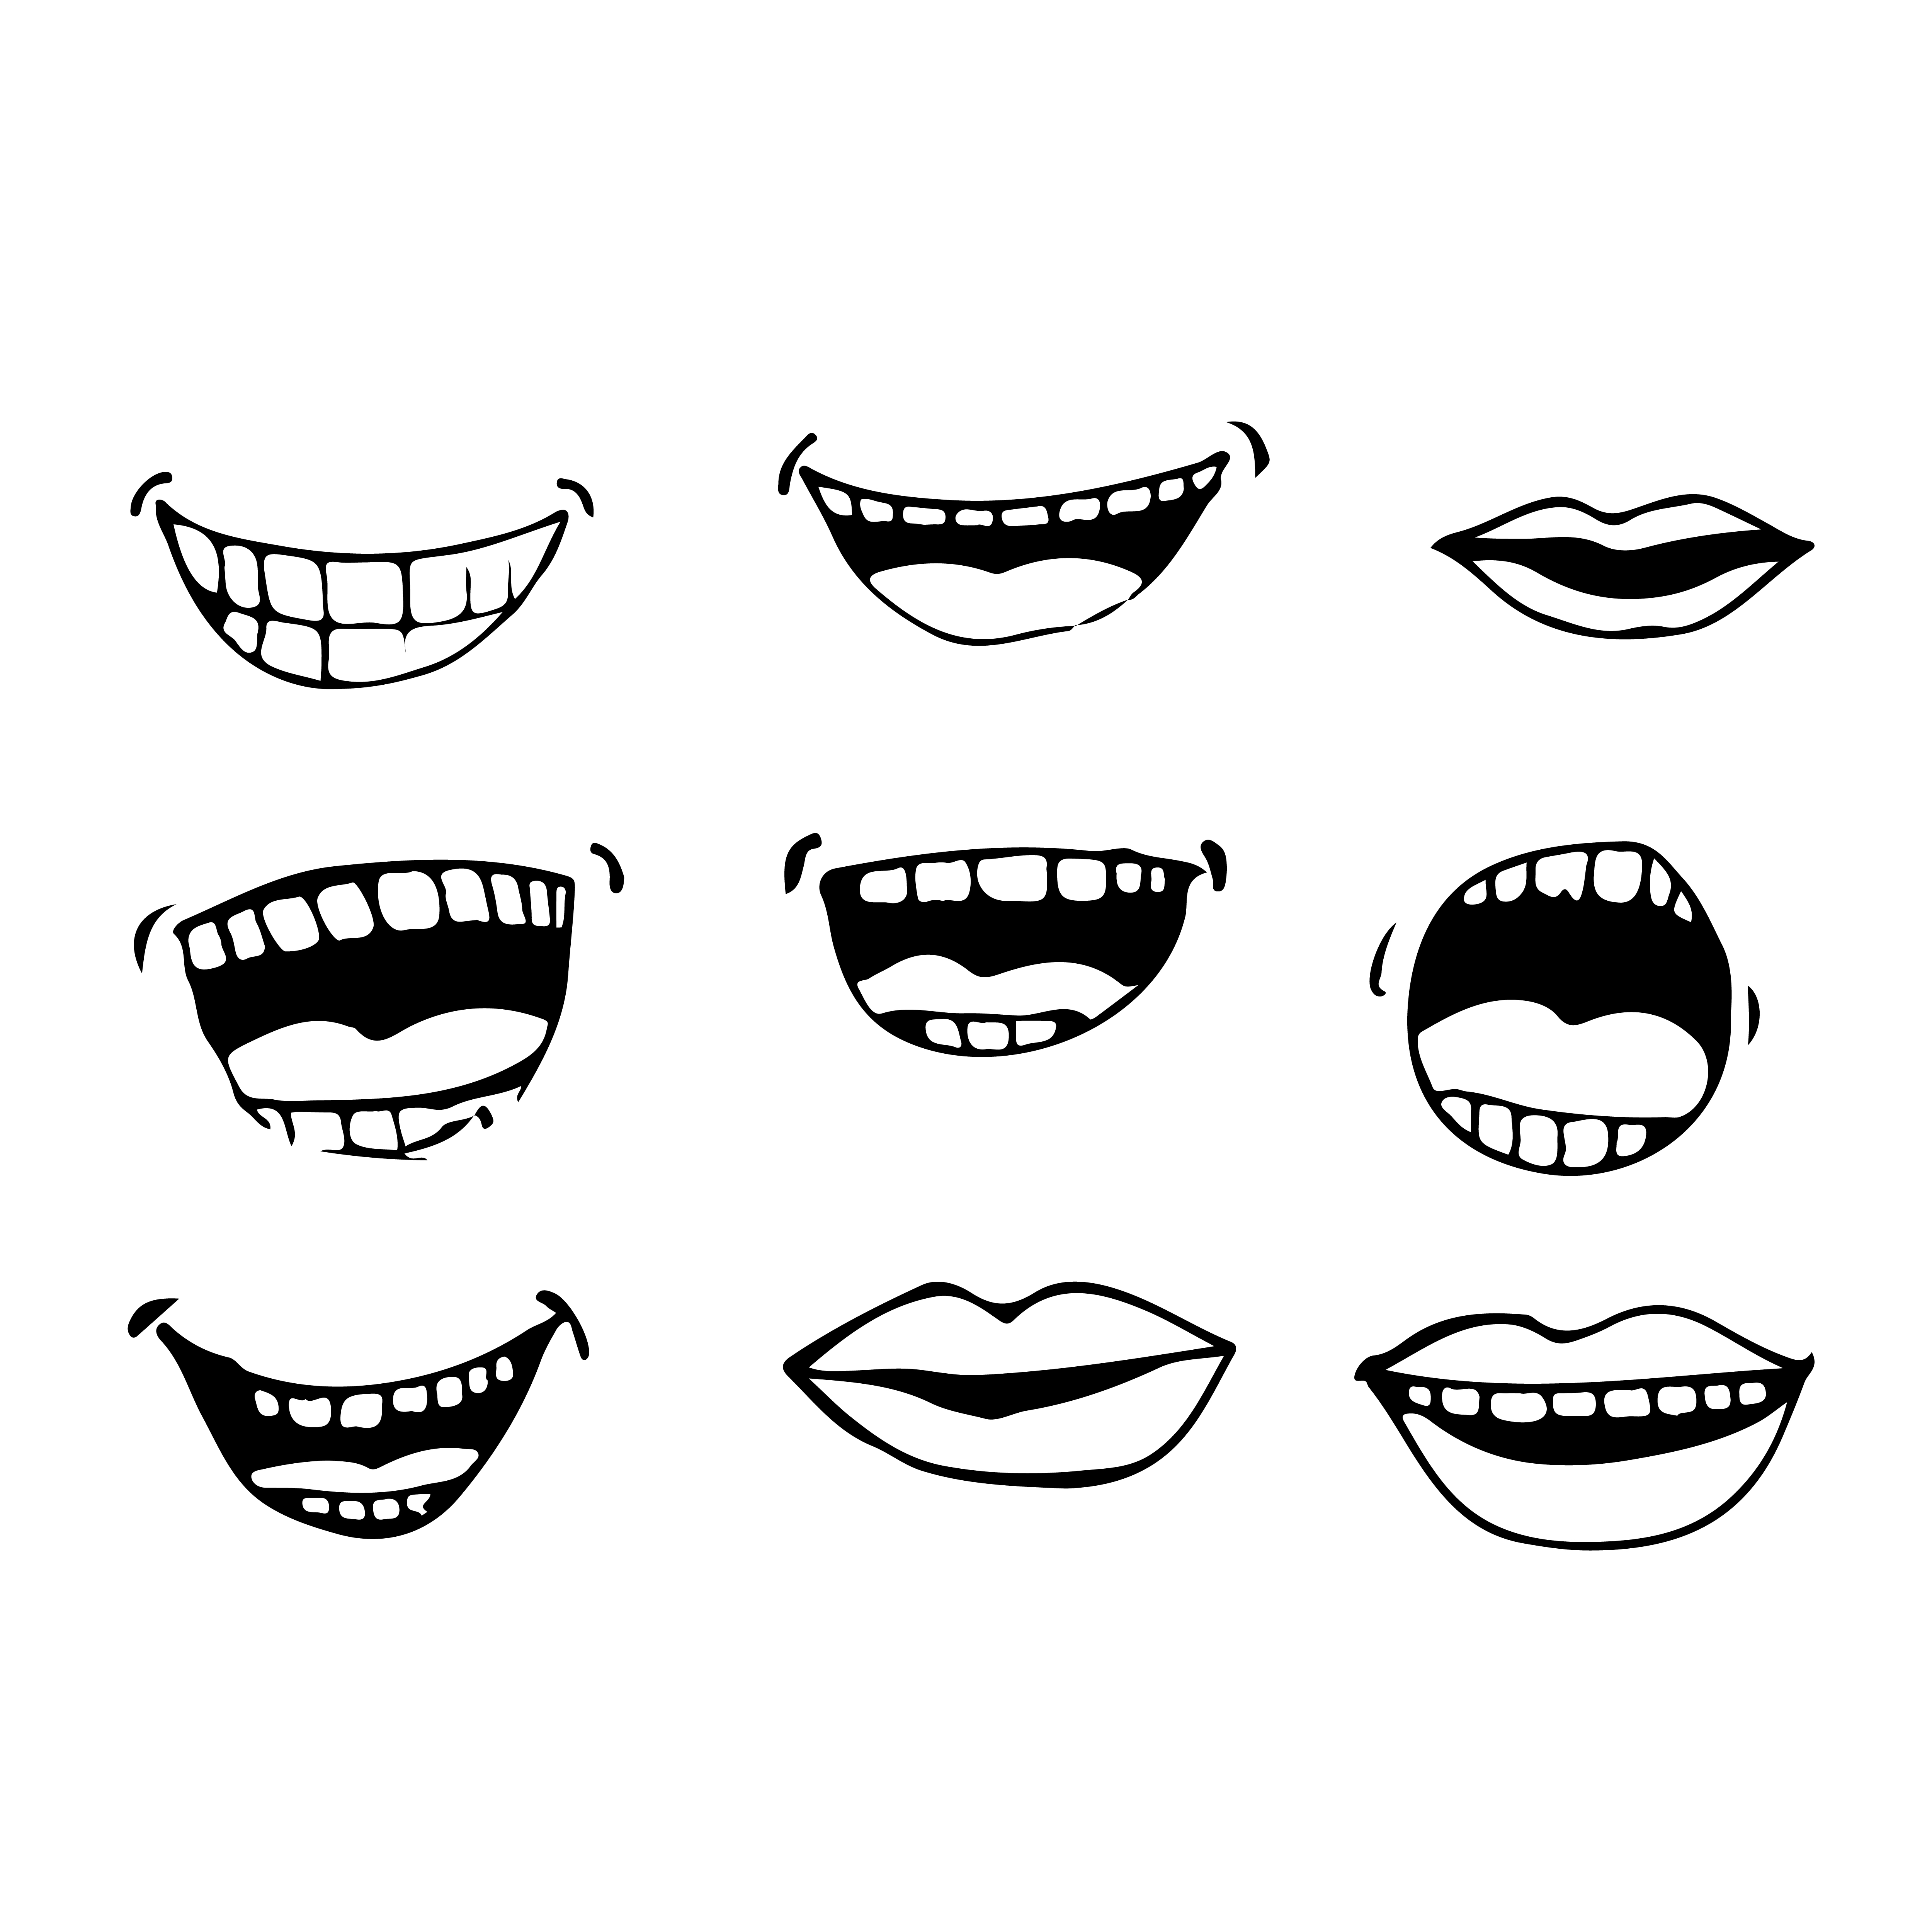 Comic Mouth Free Vector Art - (800 Free Downloads)